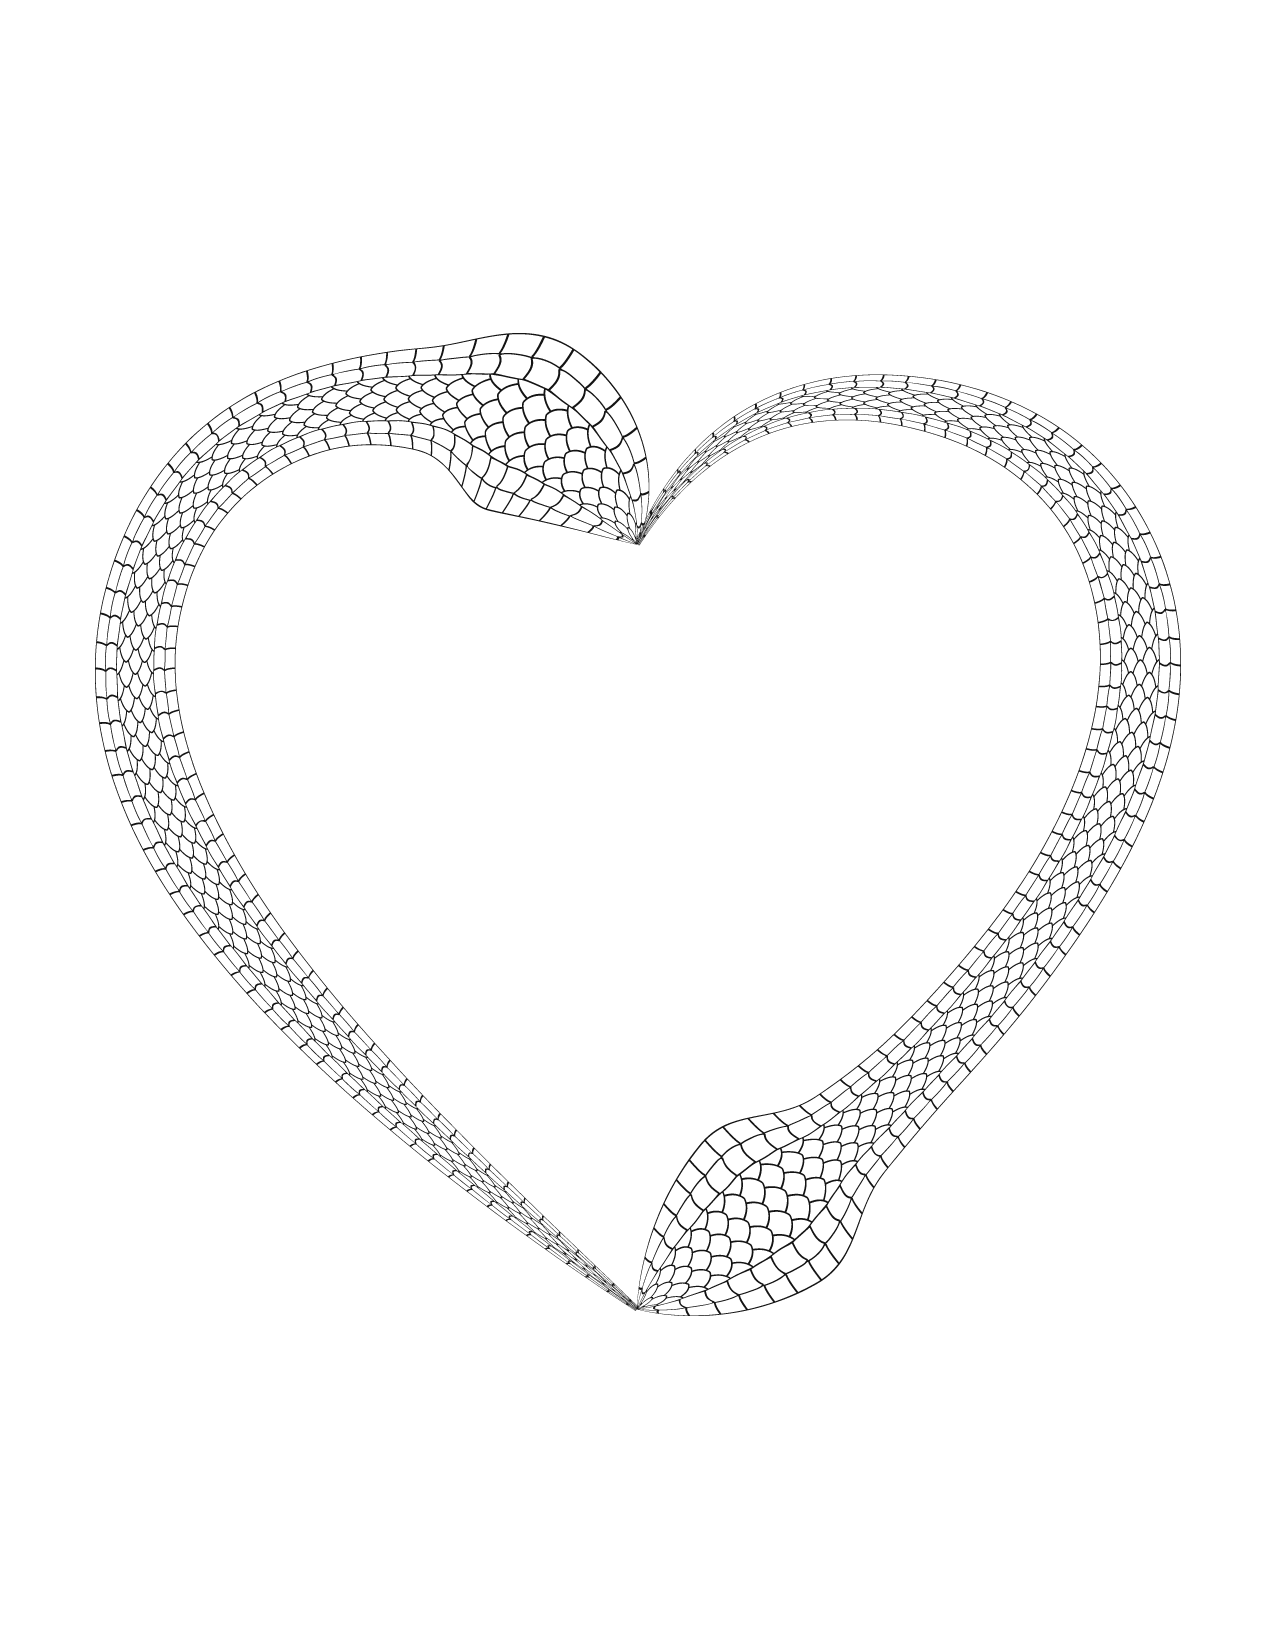 Snakes In Heart Shape Coloring Page